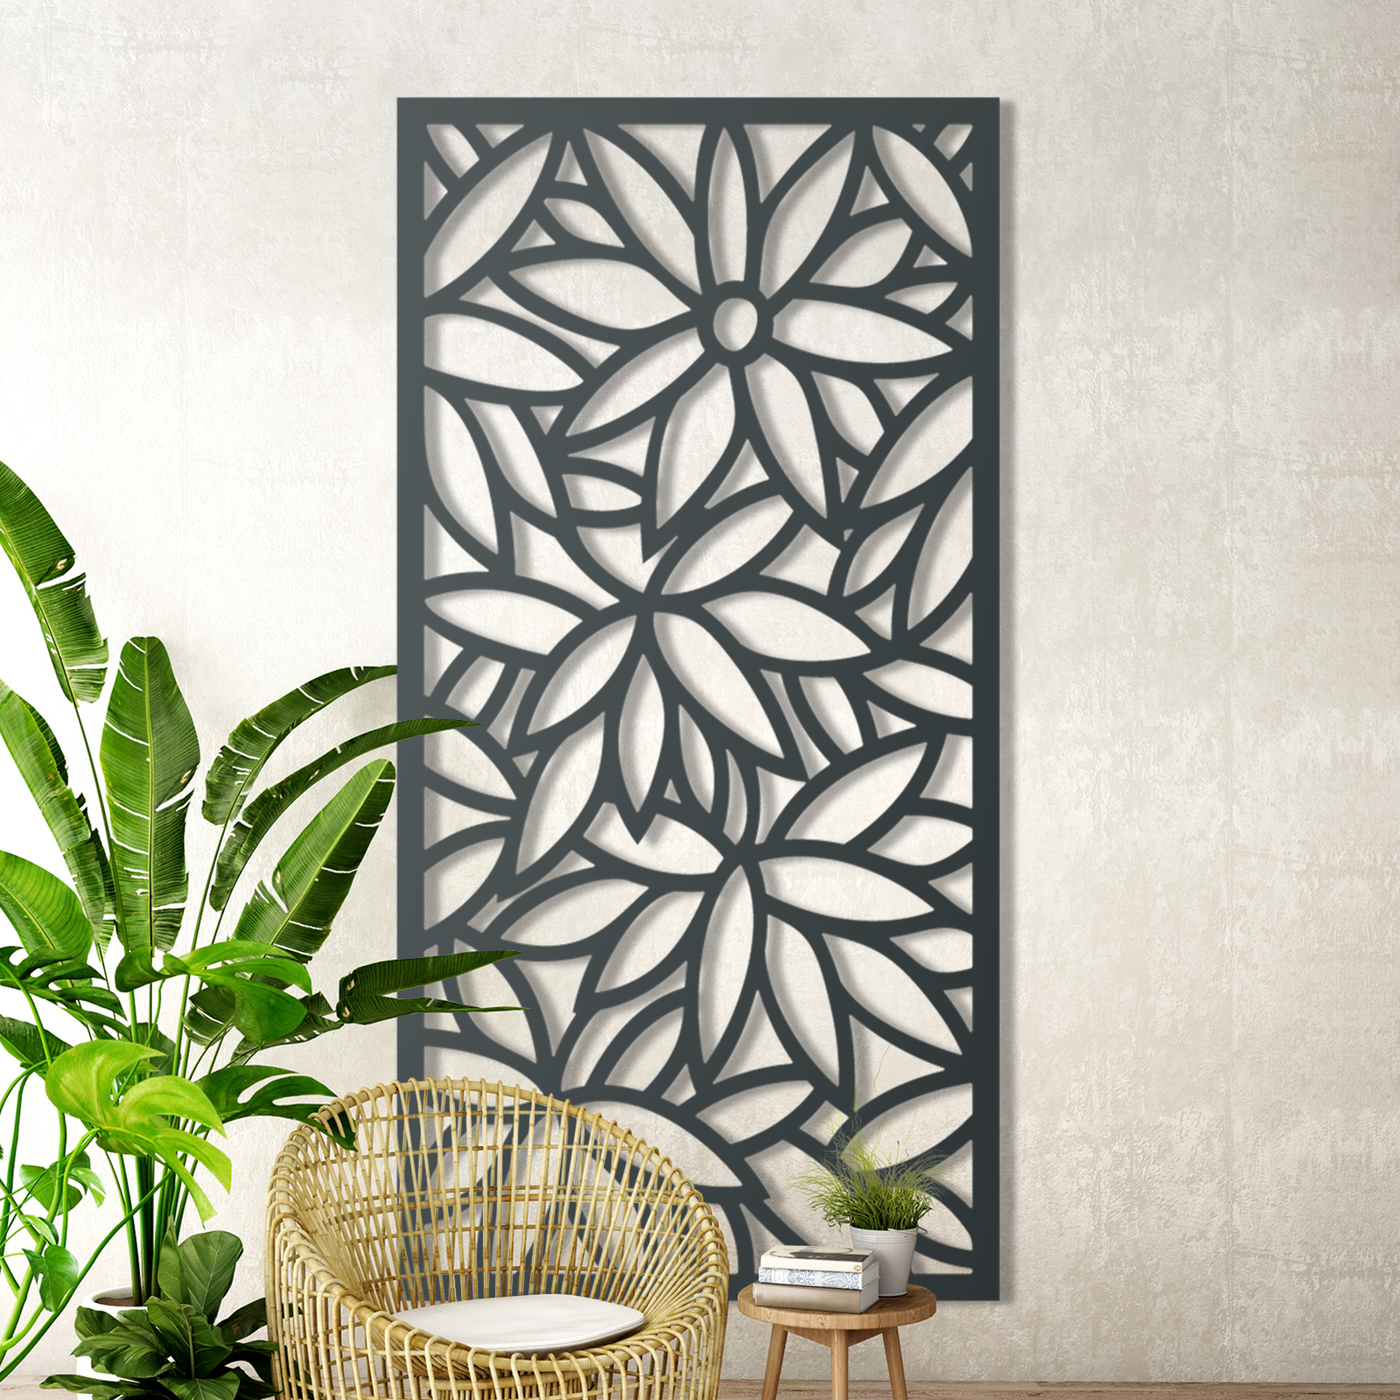 Flower Bloom Metal Garden Screen: A Great Way to Add Style and Privacy to Your Outdoor Space